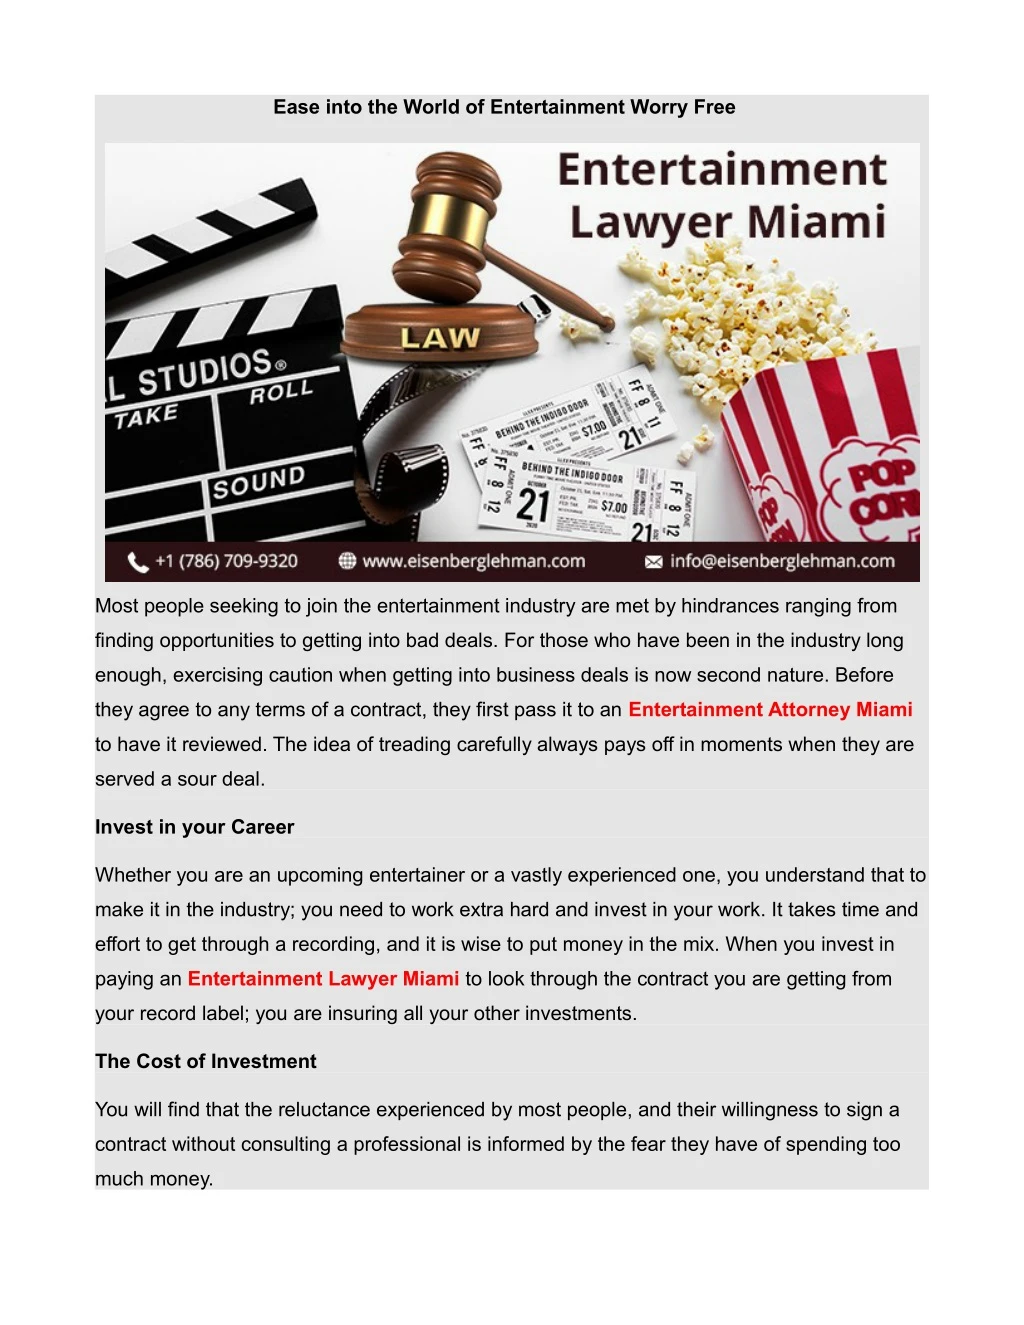 ease into the world of entertainment worry free